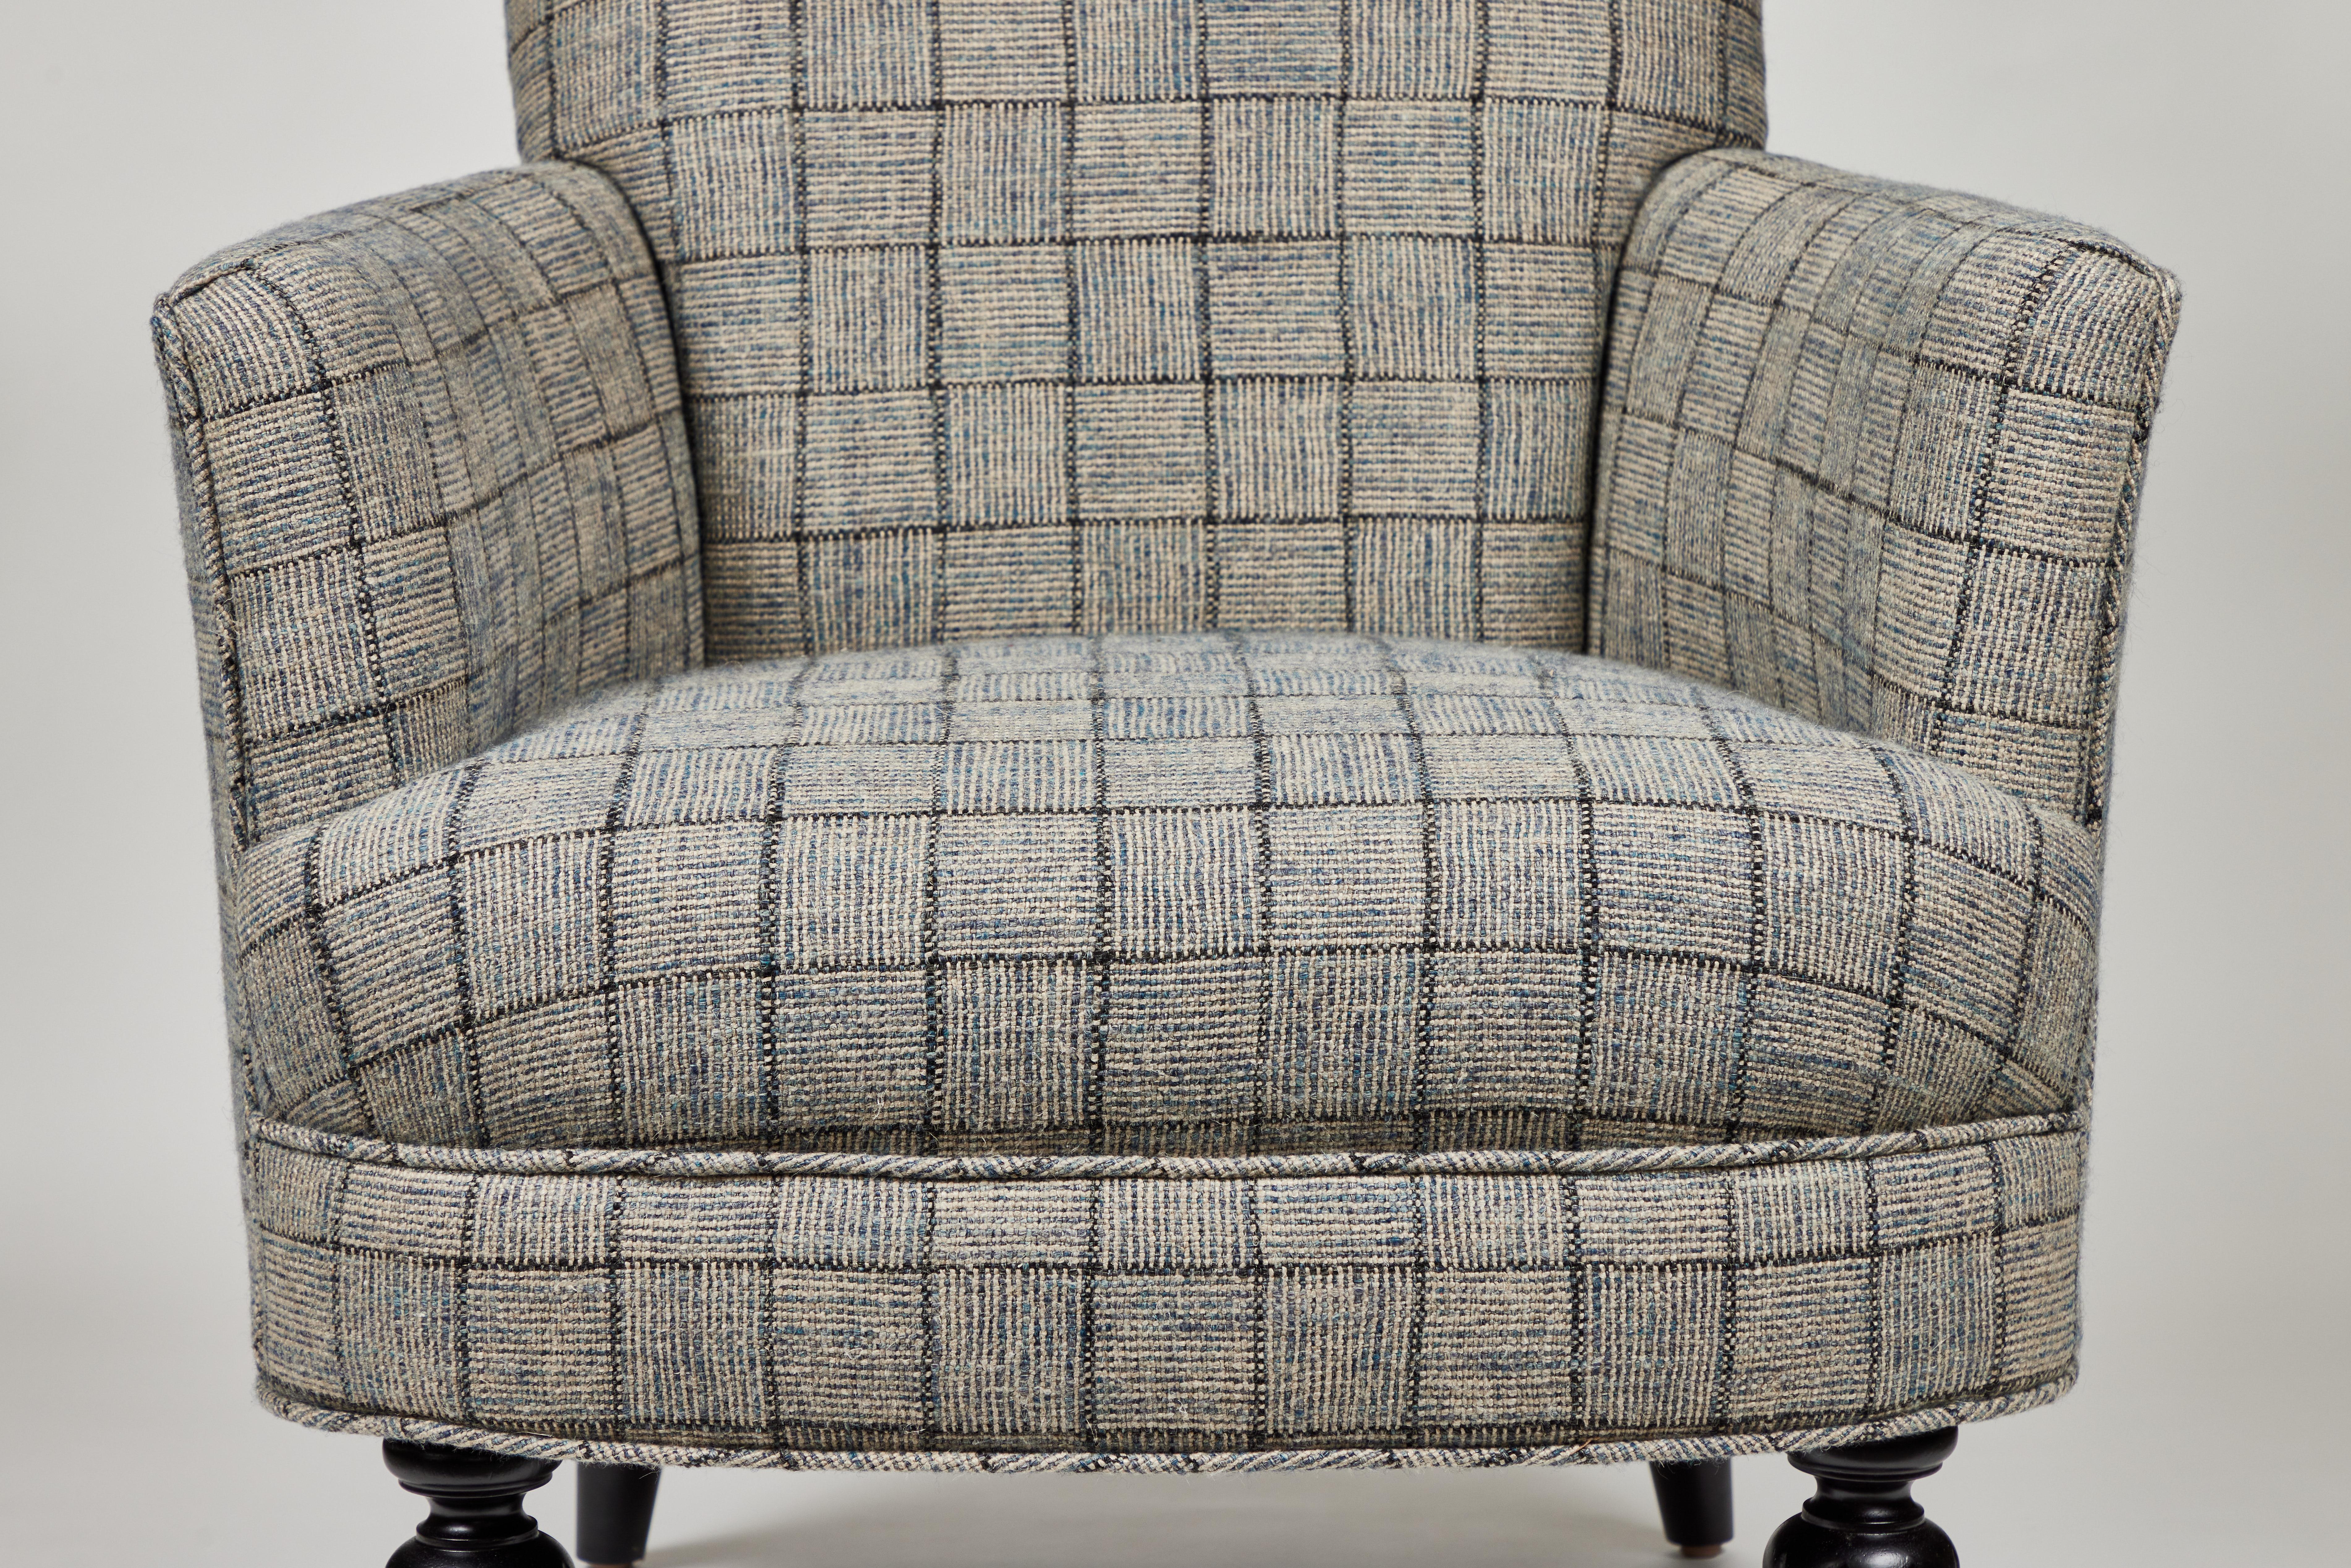 1940s occasional chair newly upholstered in wool and linen 'Crosshatch